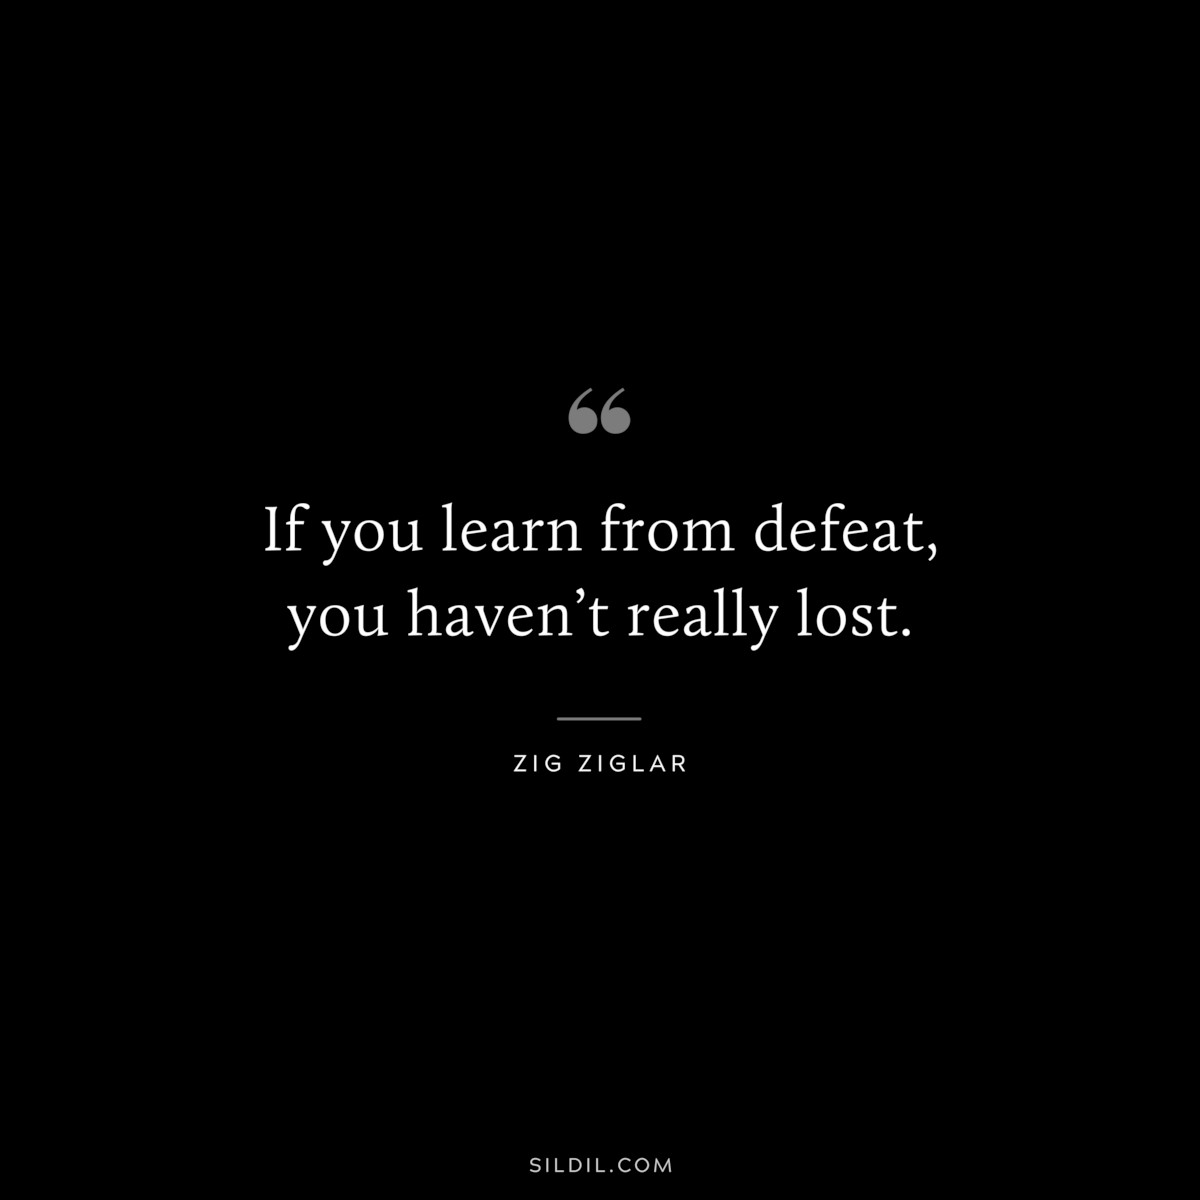 If you learn from defeat, you haven’t really lost. ― Zig Ziglar